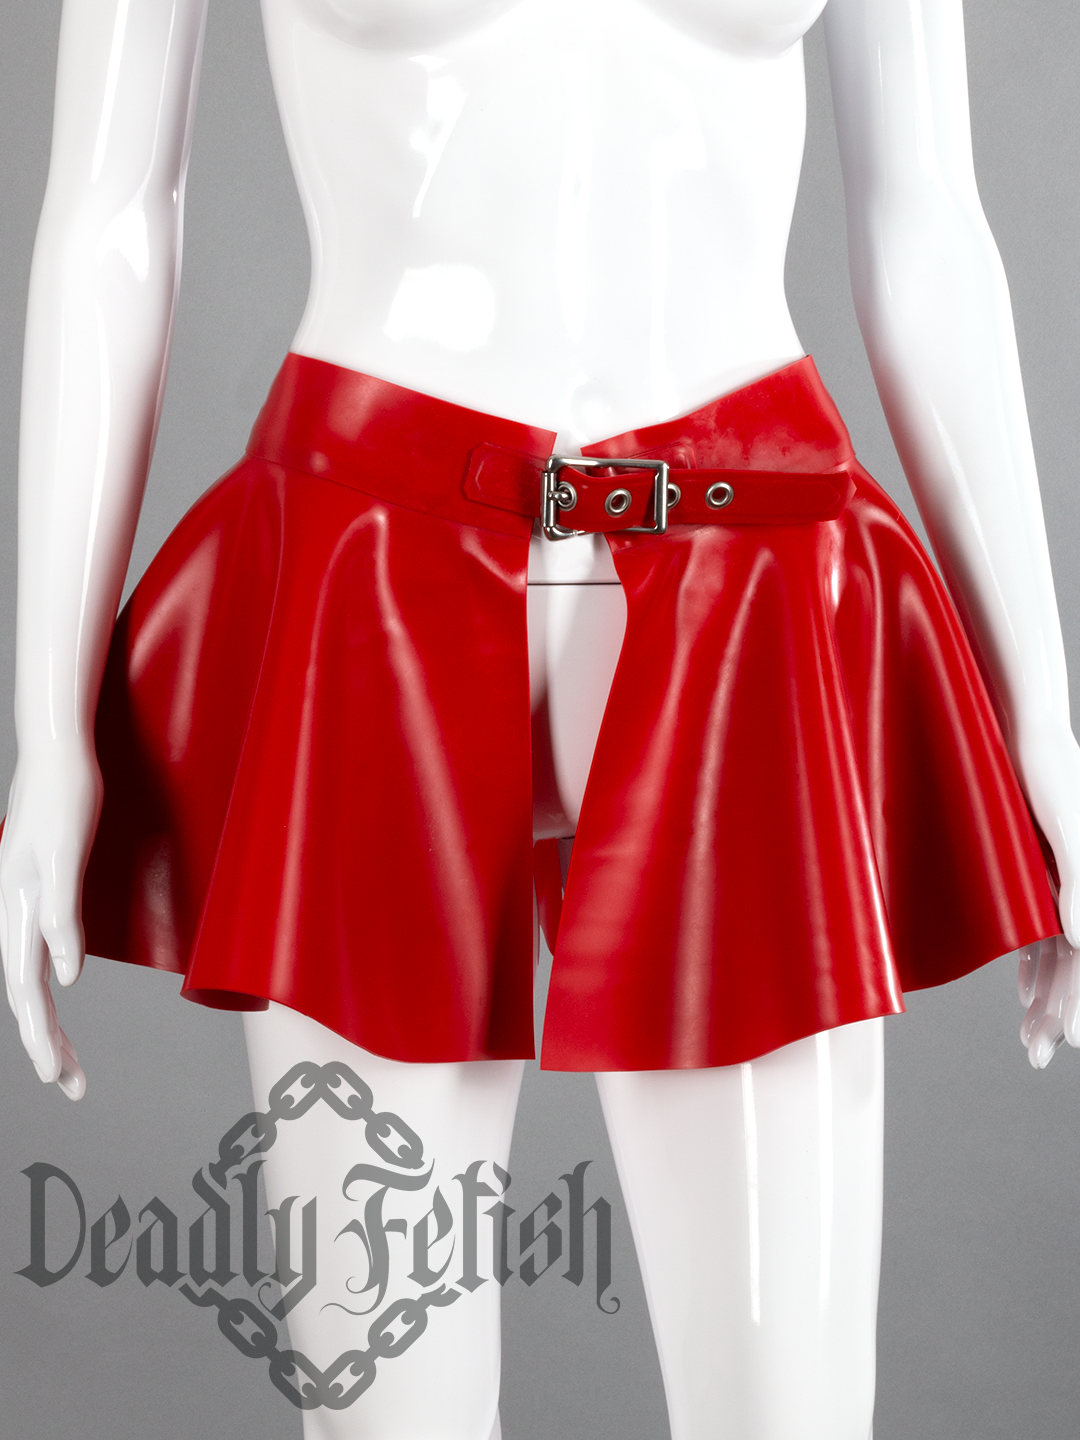 Deadly Fetish Made-To-Order Latex: Skirt #10